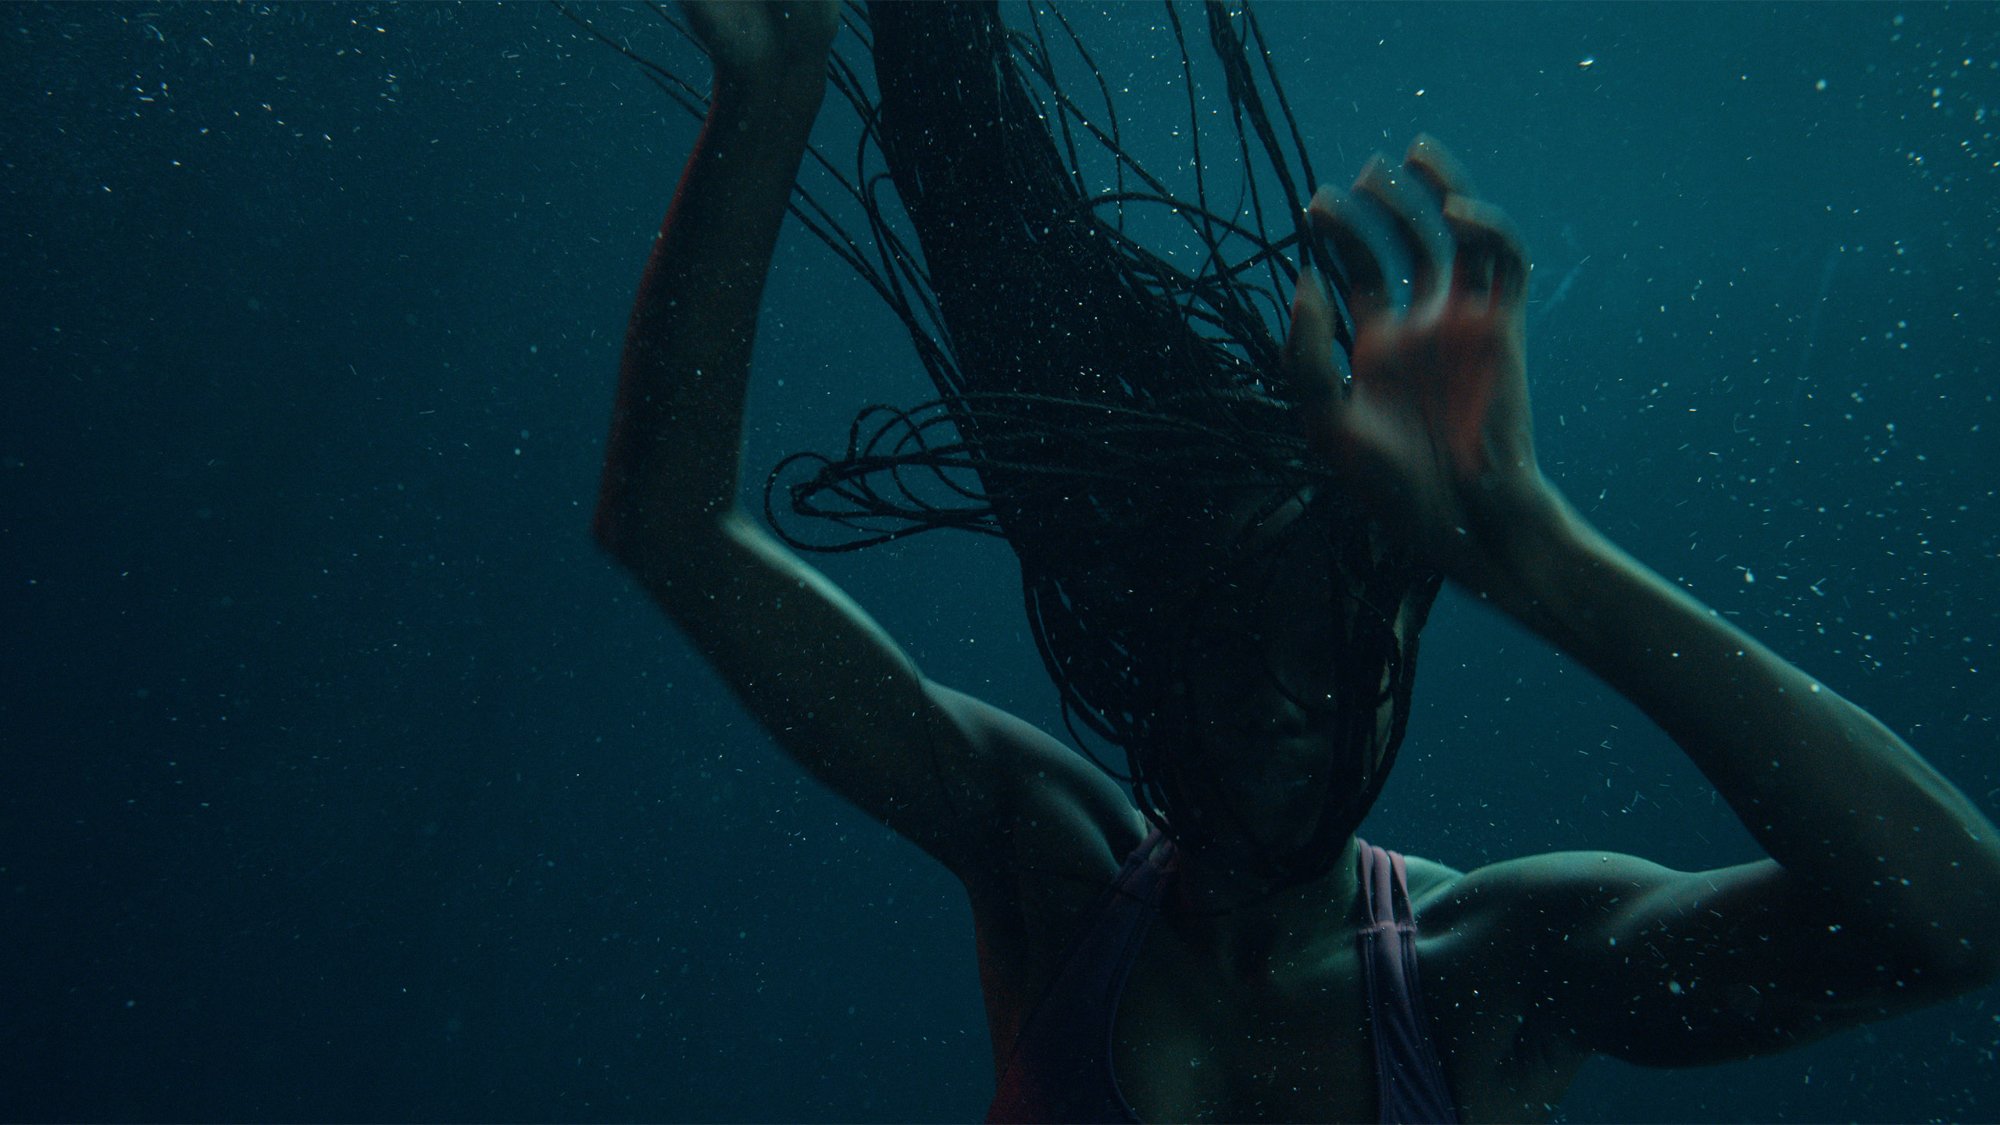 'Nanny' Anna Diop as Aisha underwater holding her hands up